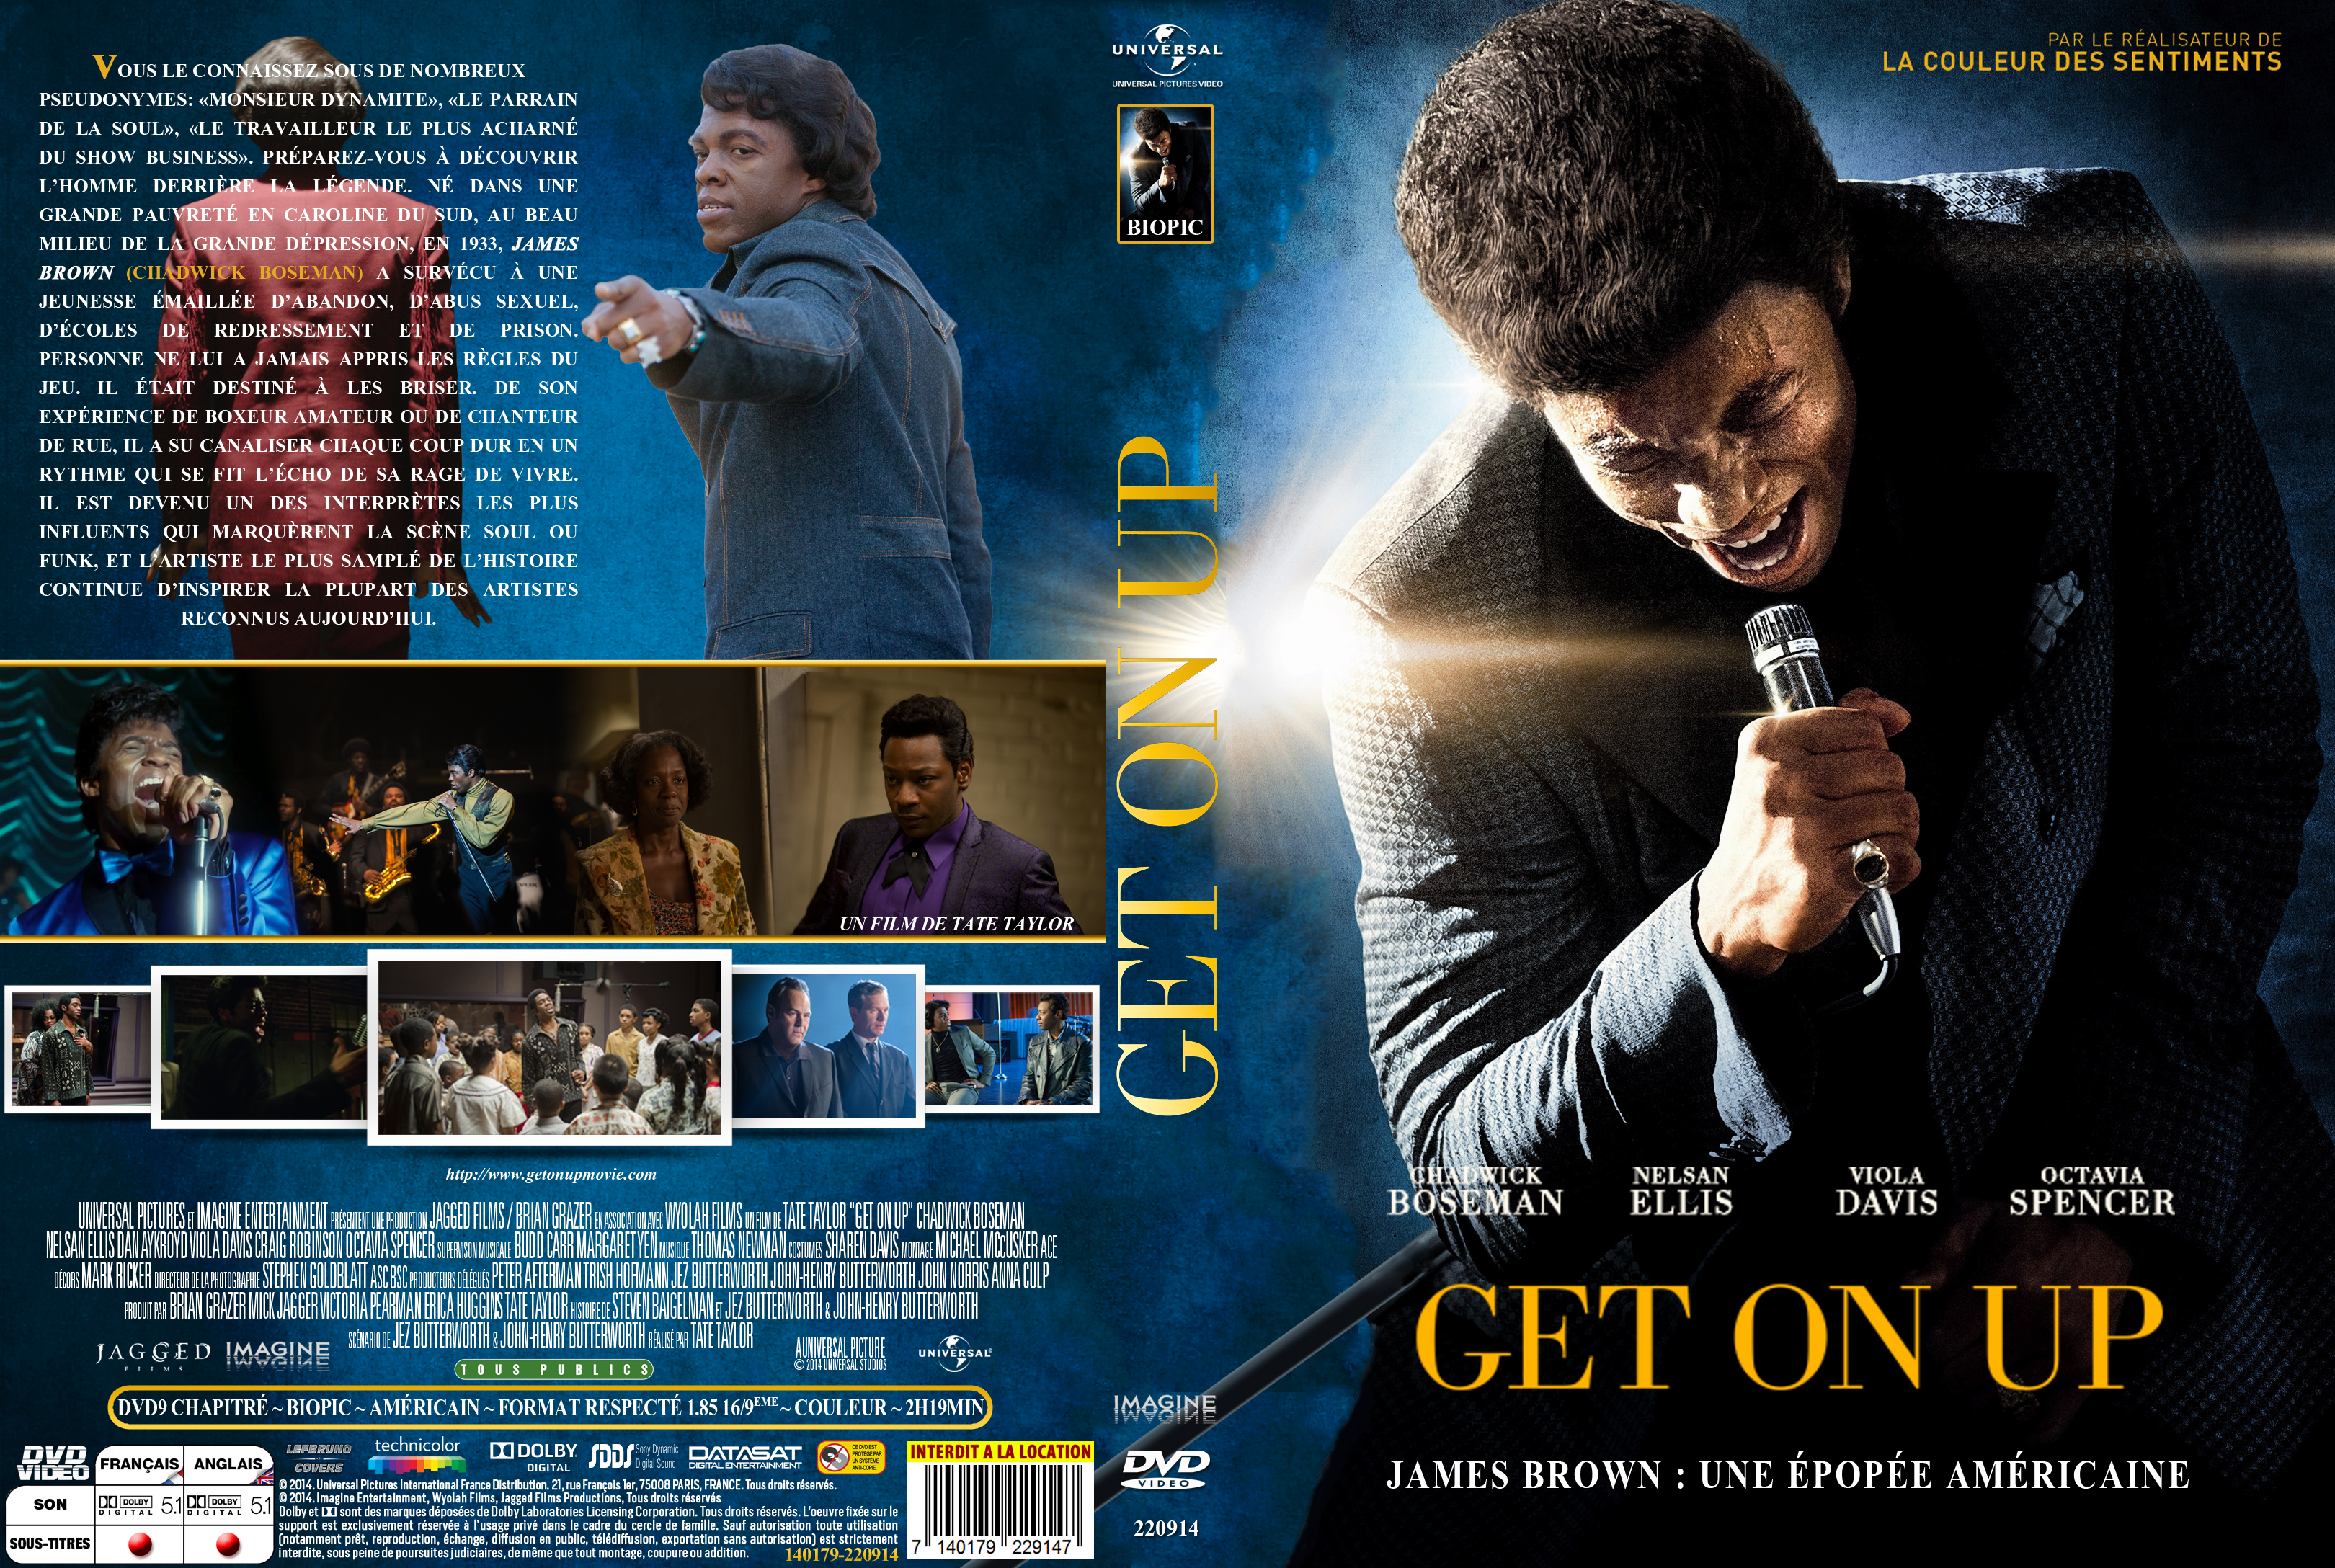 Jaquette DVD Get On Up custom